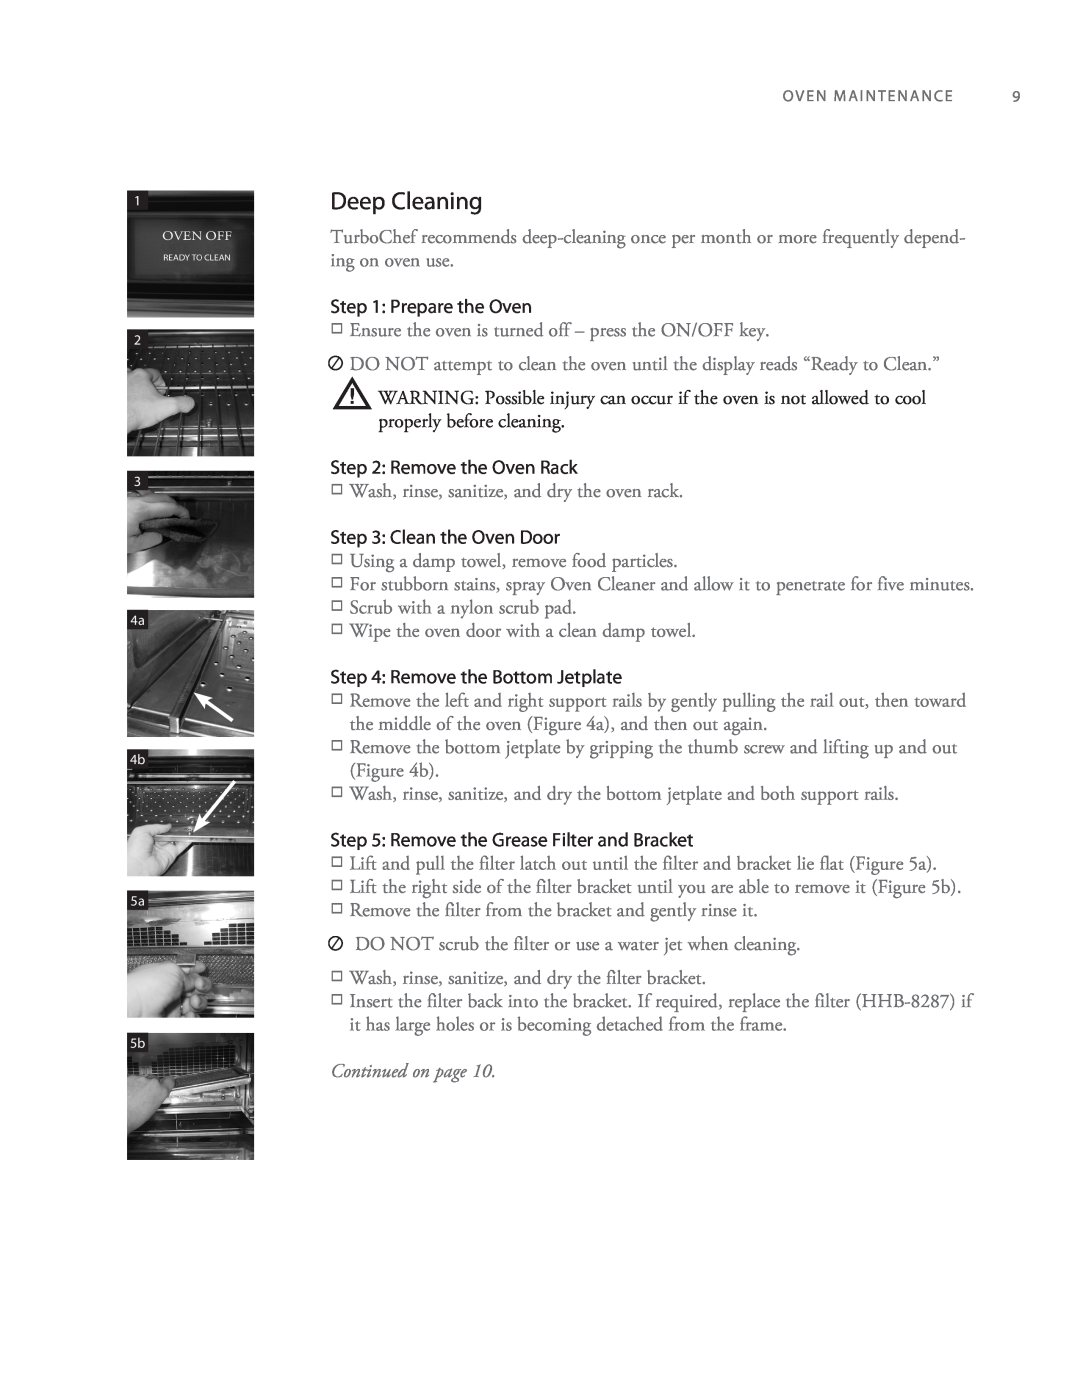 Turbo Chef Technologies 2TM manual Deep Cleaning, Continued on page 